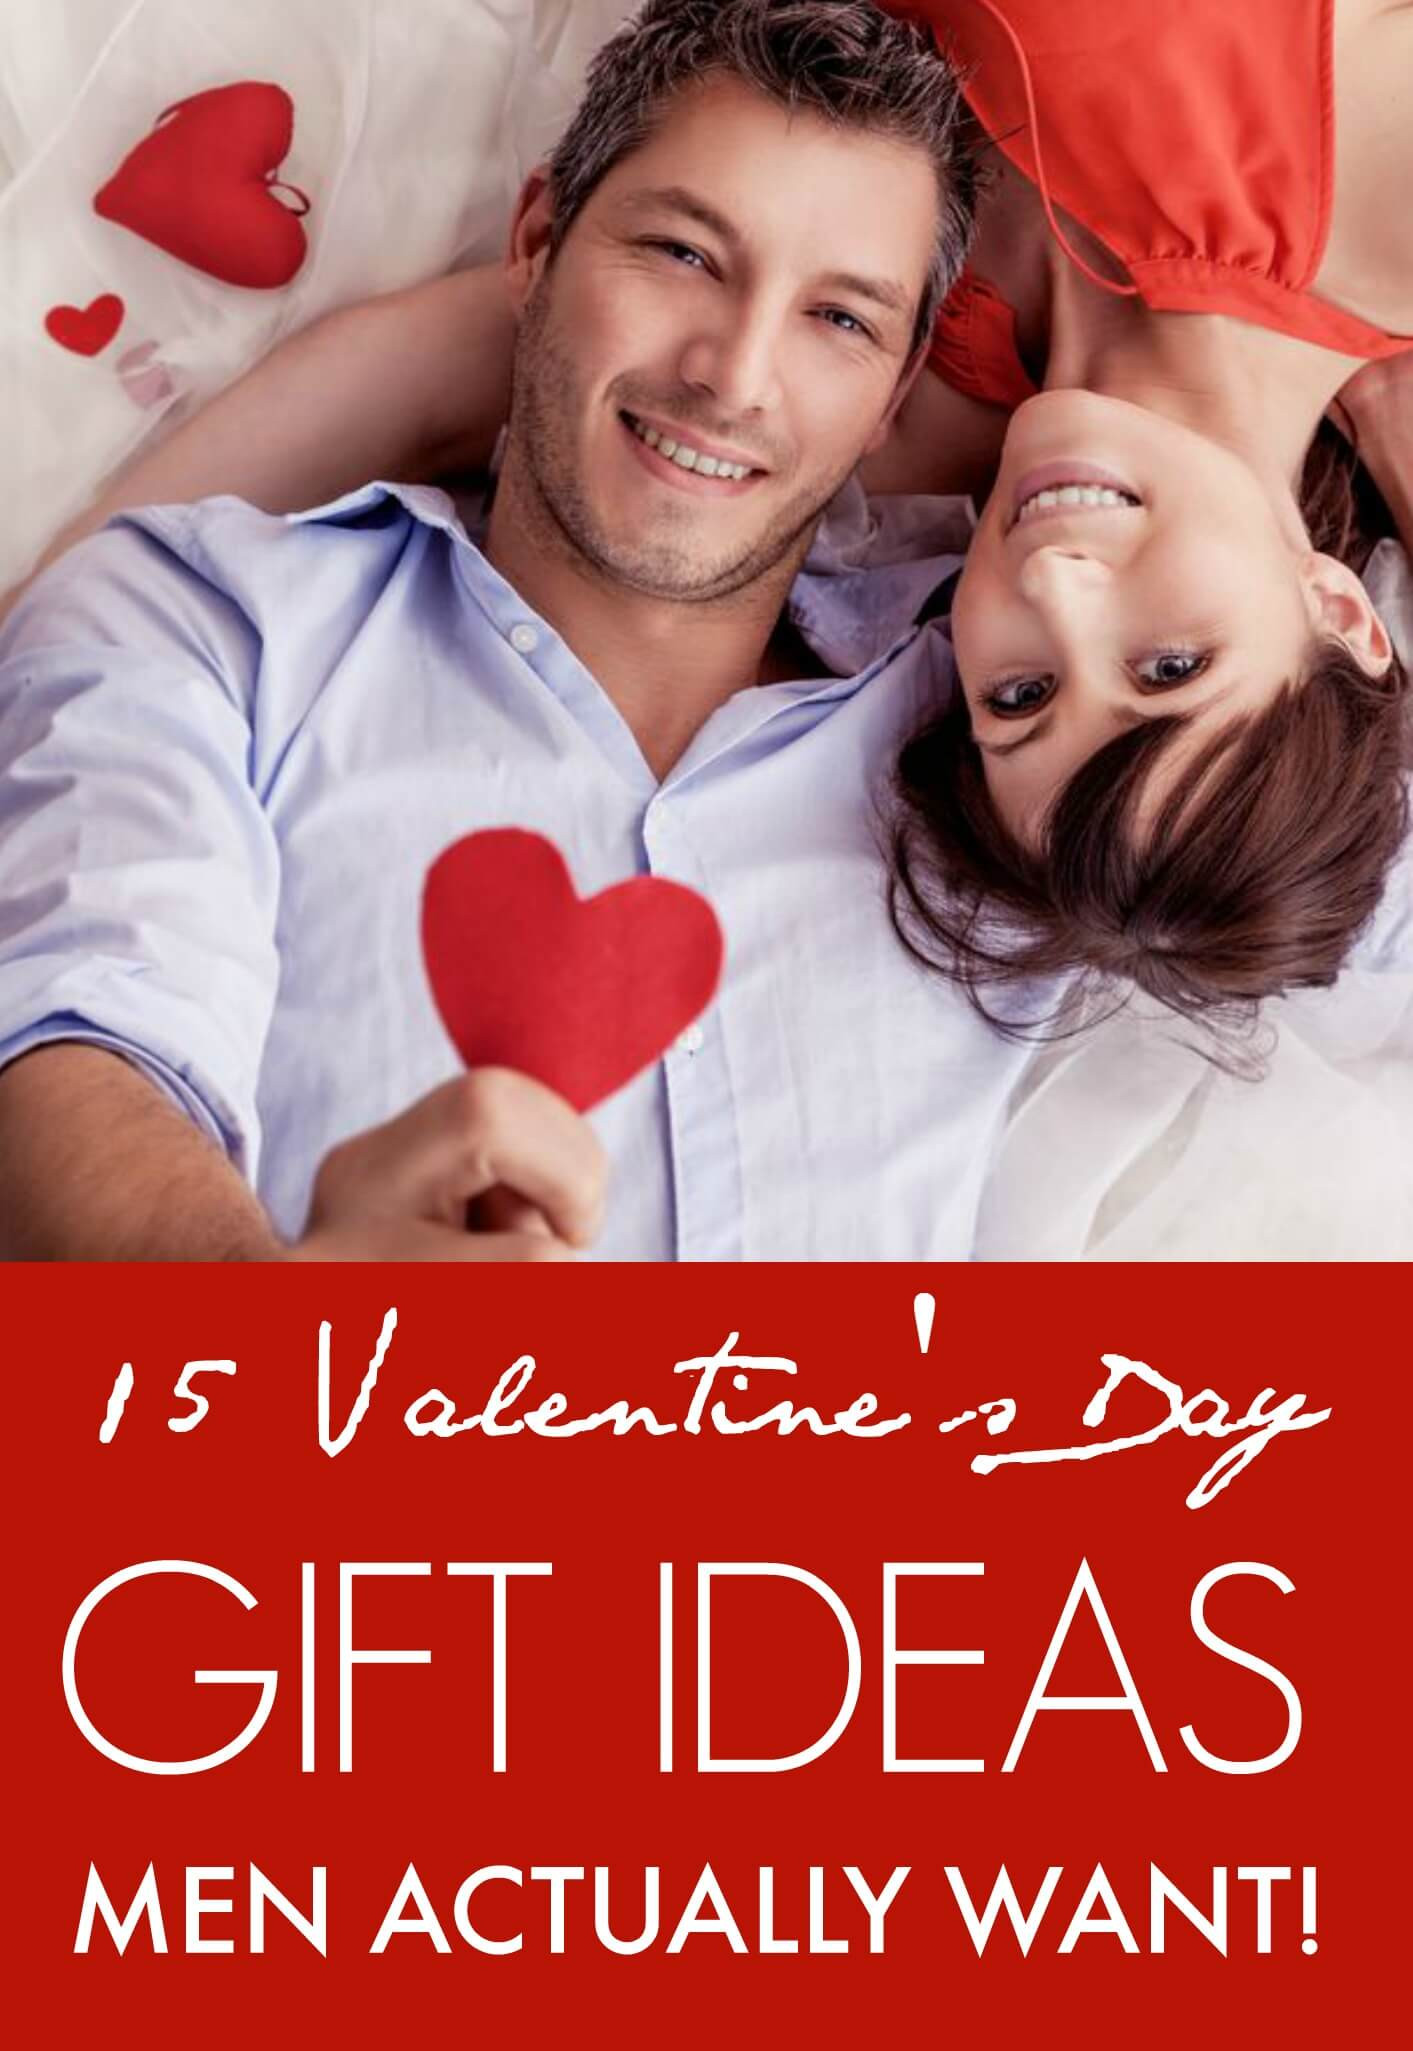 Men Valentines Day Gift Ideas
 15 Valentine’s Day Gift ideas Men Actually Want